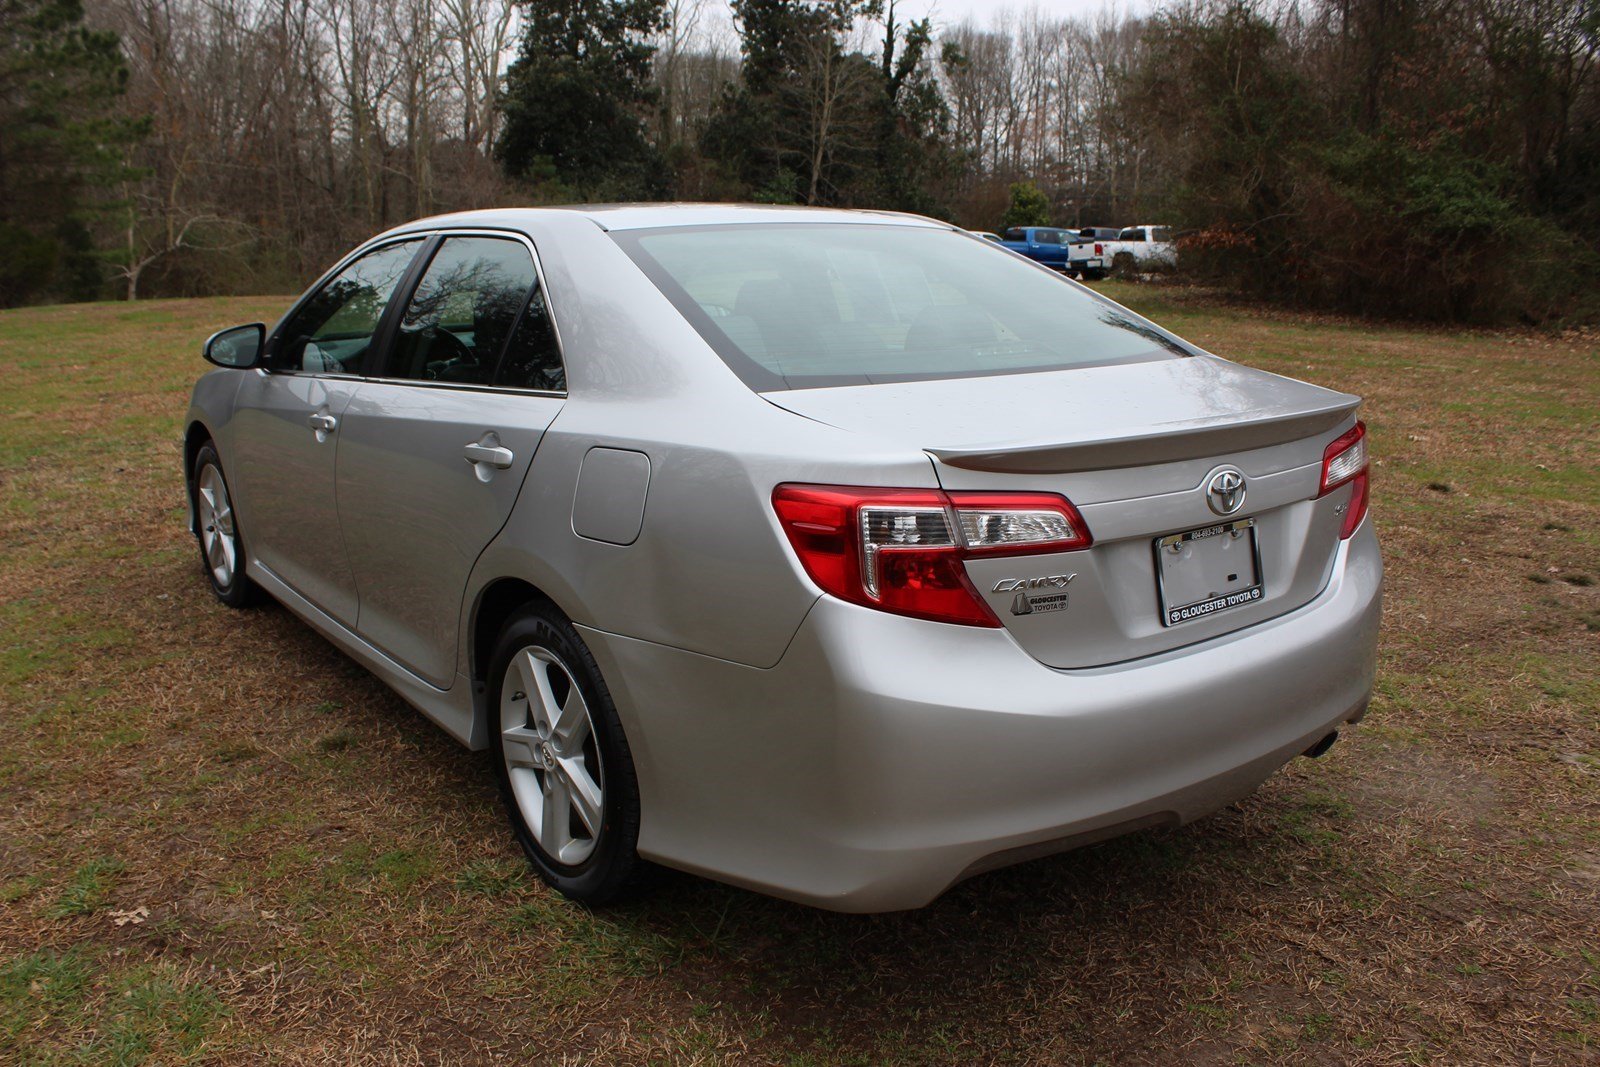 Pre-Owned 2012 Toyota Camry SE 4dr Car in Gloucester #P2730 ...